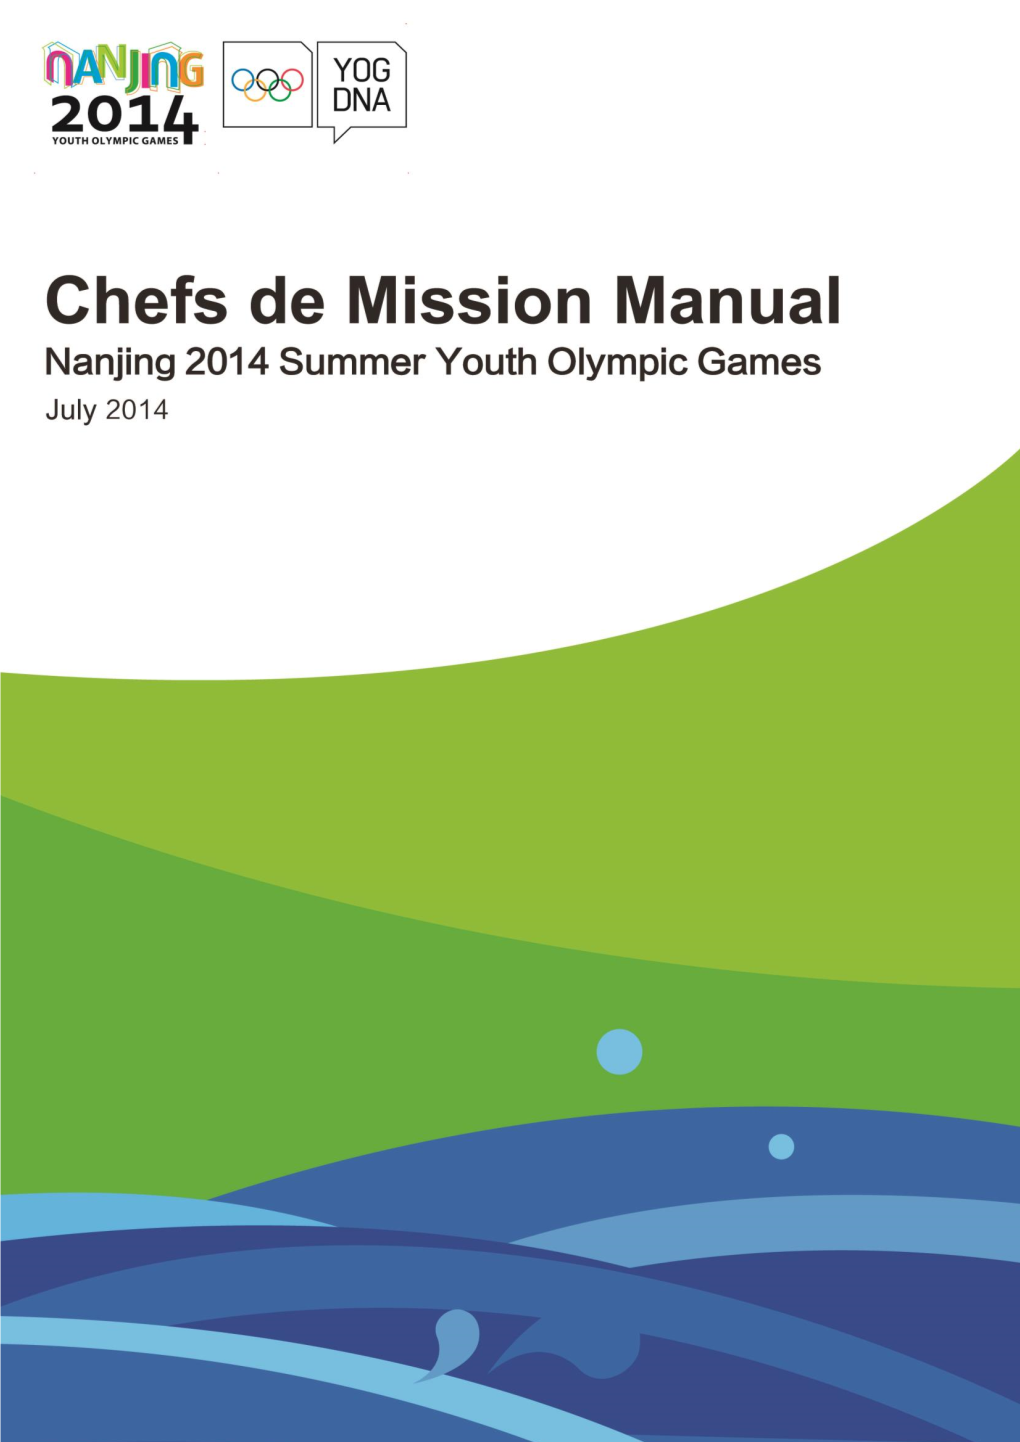 Chefs De Mission Manual Nanjing 2014 Summer Youth Olympic Games